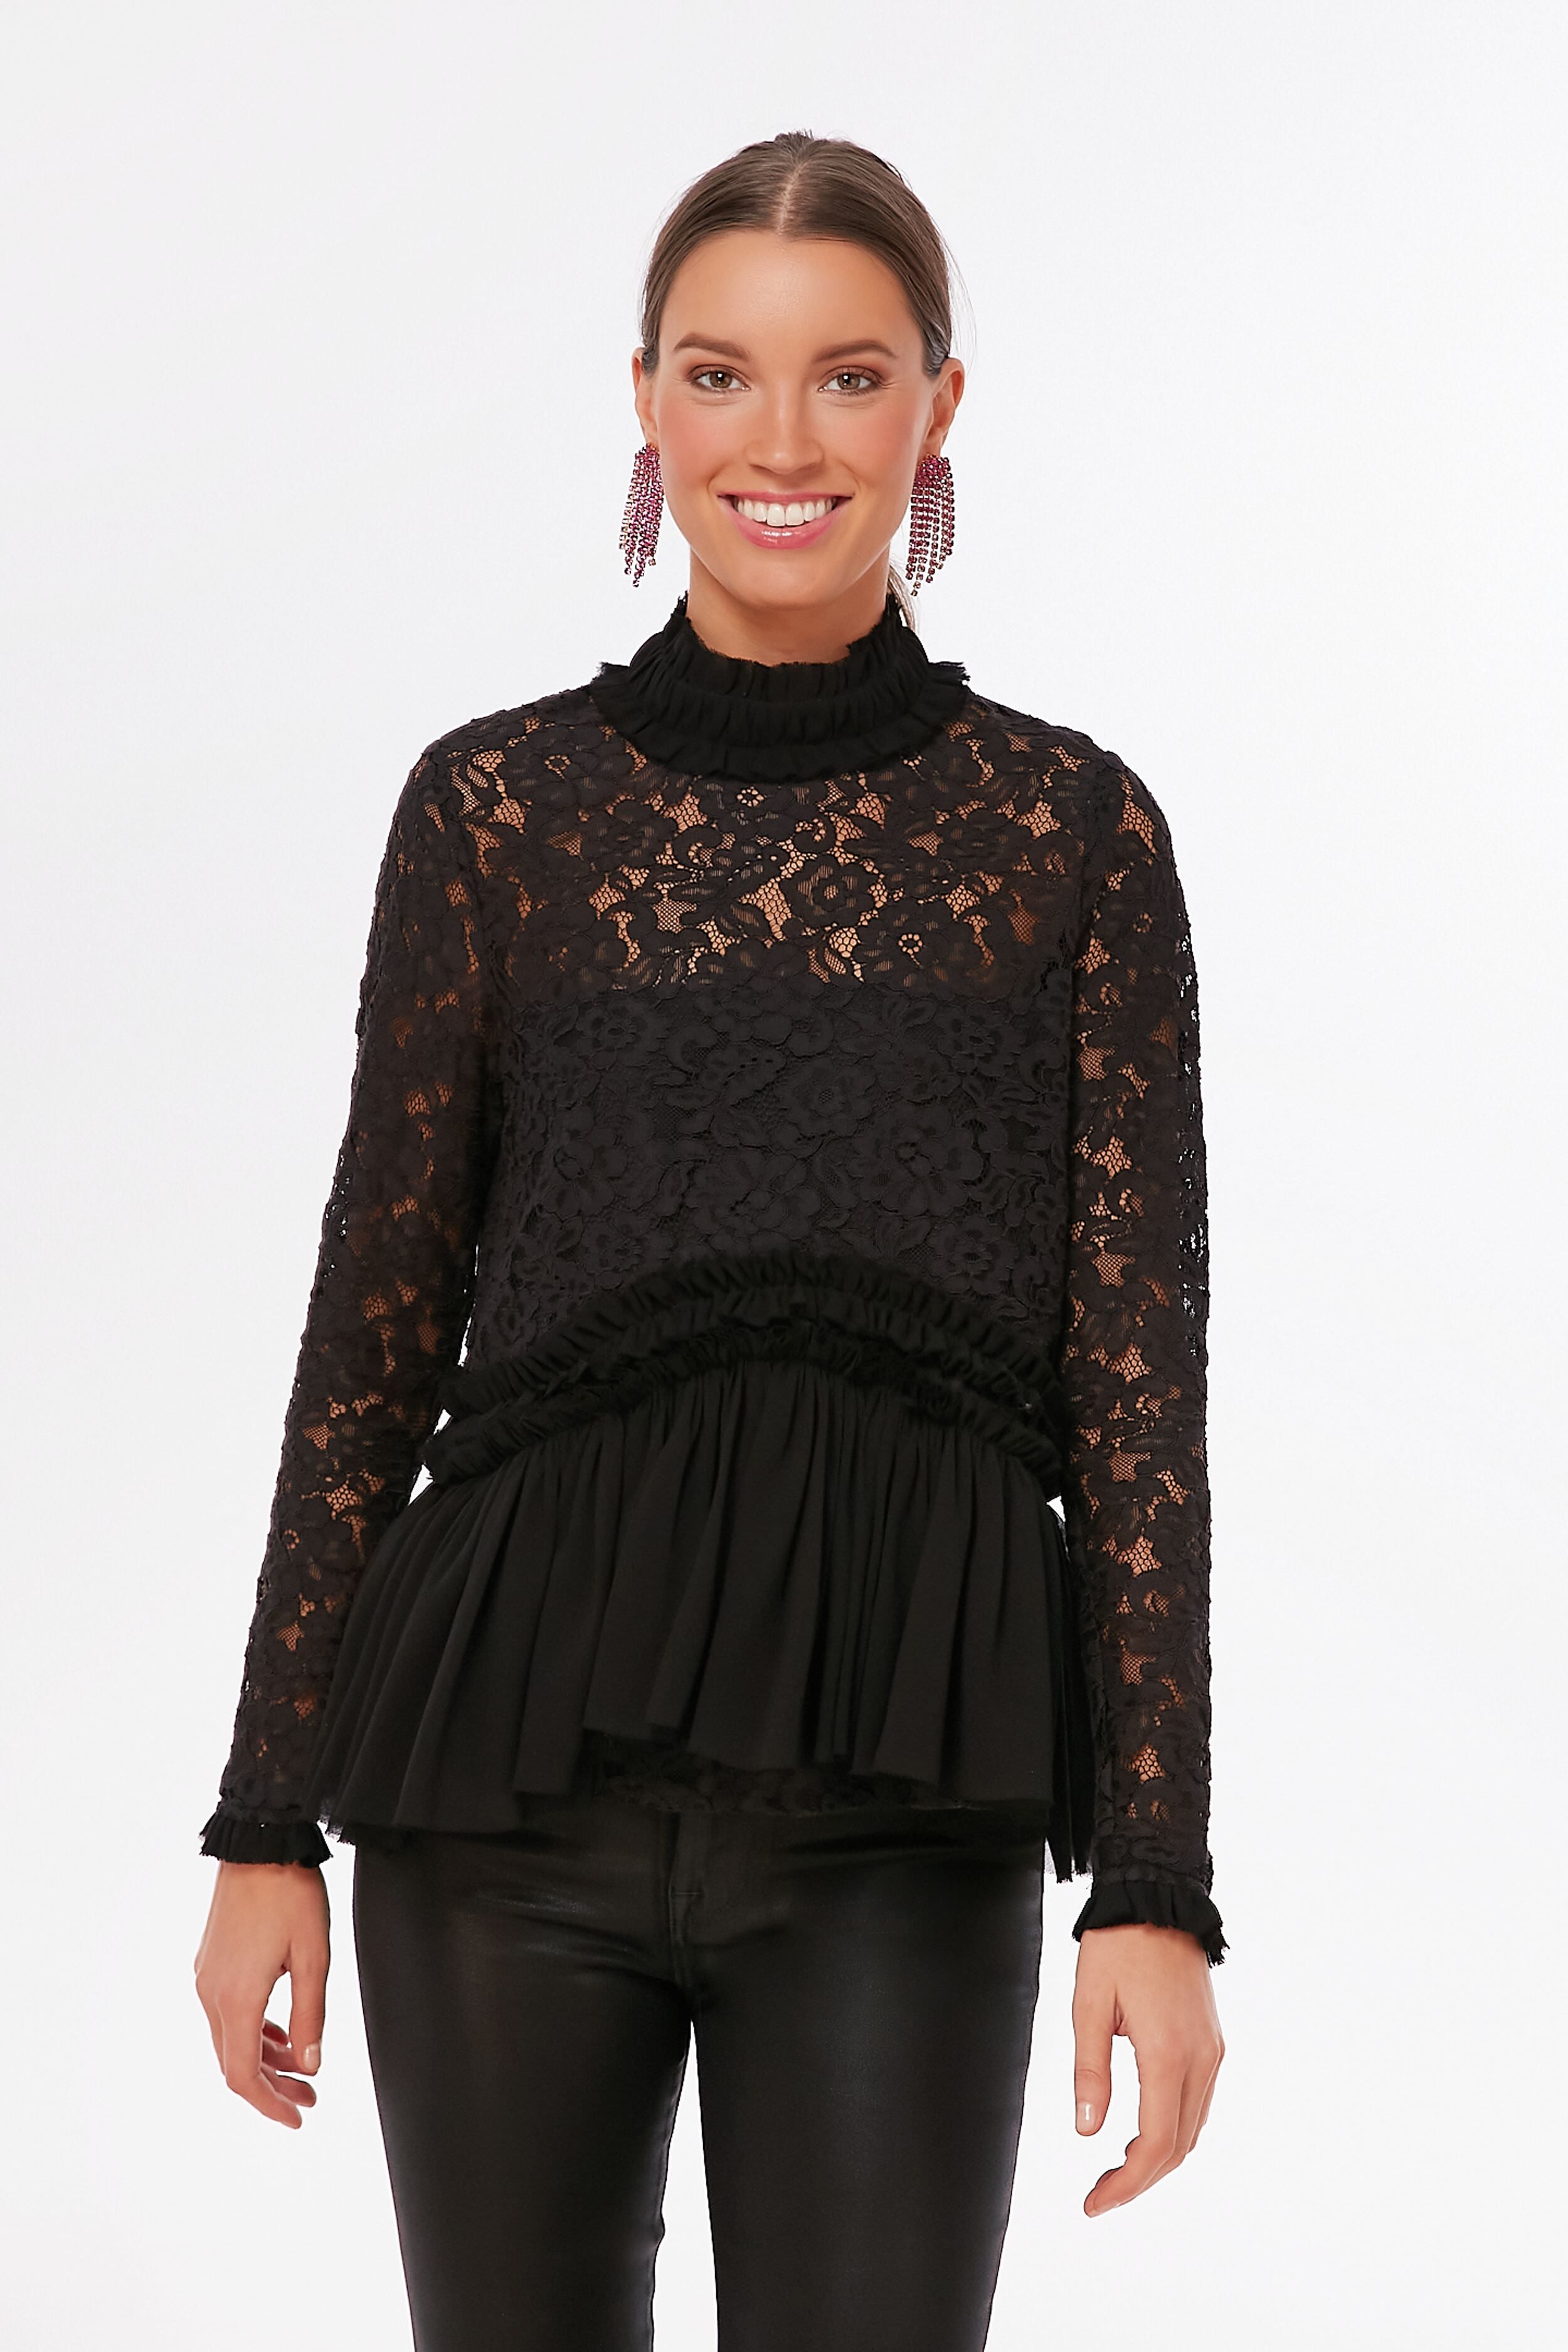 Perfectly Sheer Black Lace Sheer Button-Up Long Sleeve Top  Black lace  shirt, Long sleeves bodysuit outfit, Long sleeve tops